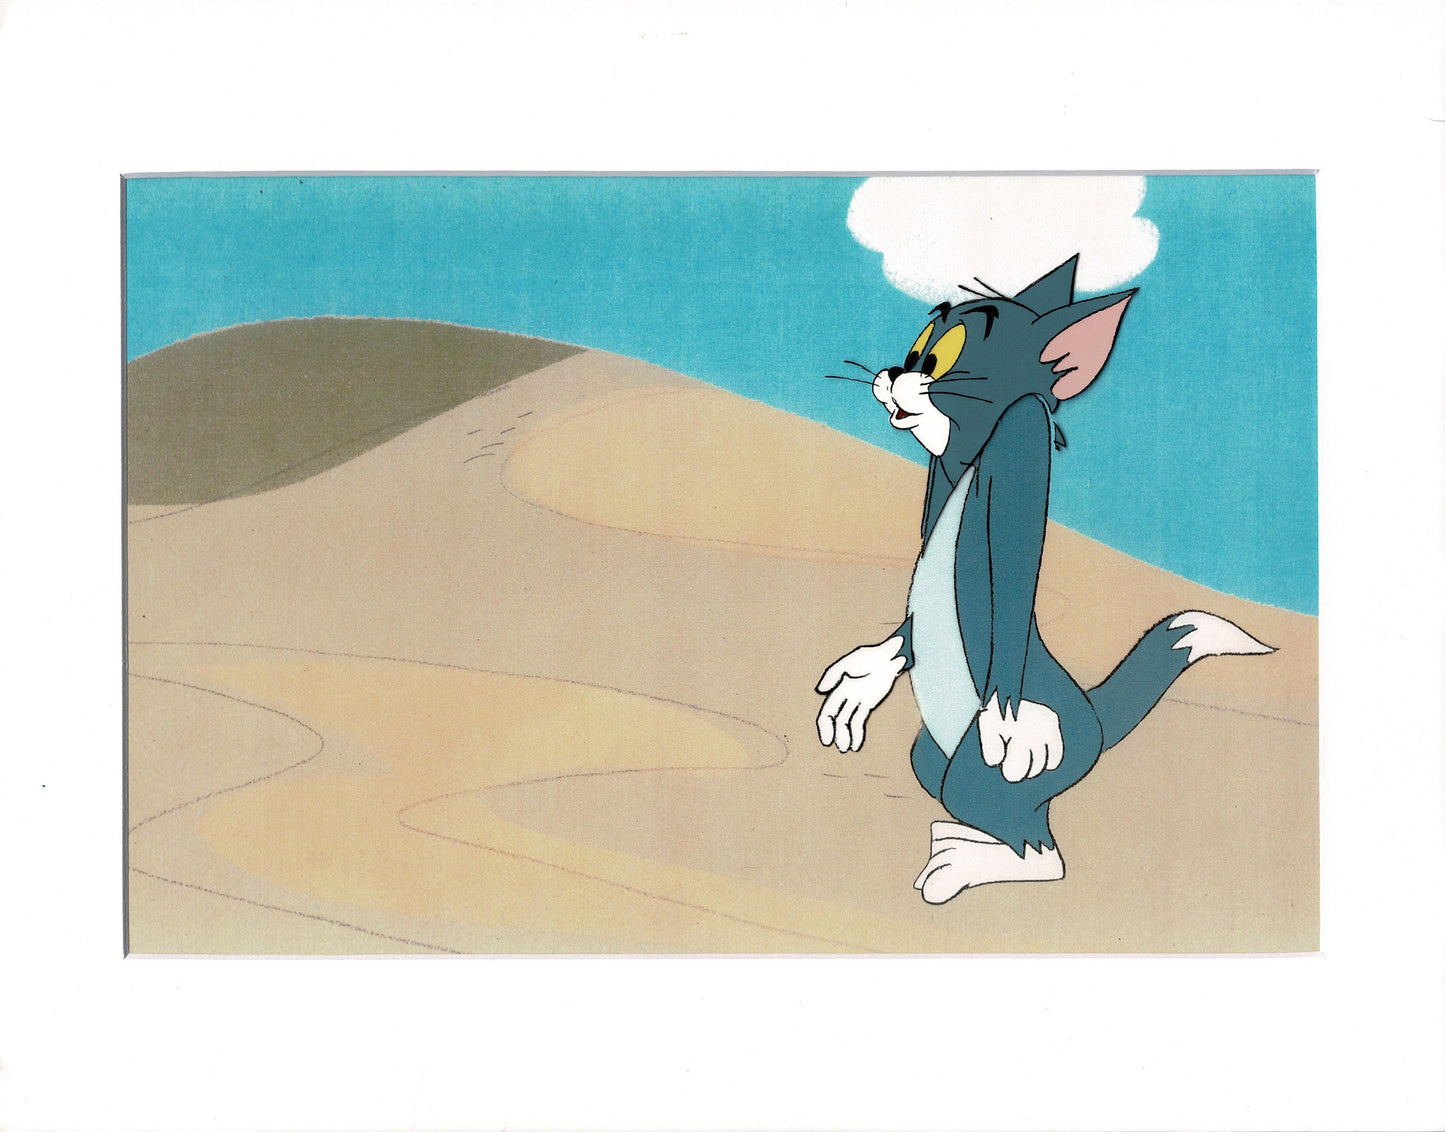 Tom & Jerry Original Production Animation Cel from Filmation 1980-82 tjmm2